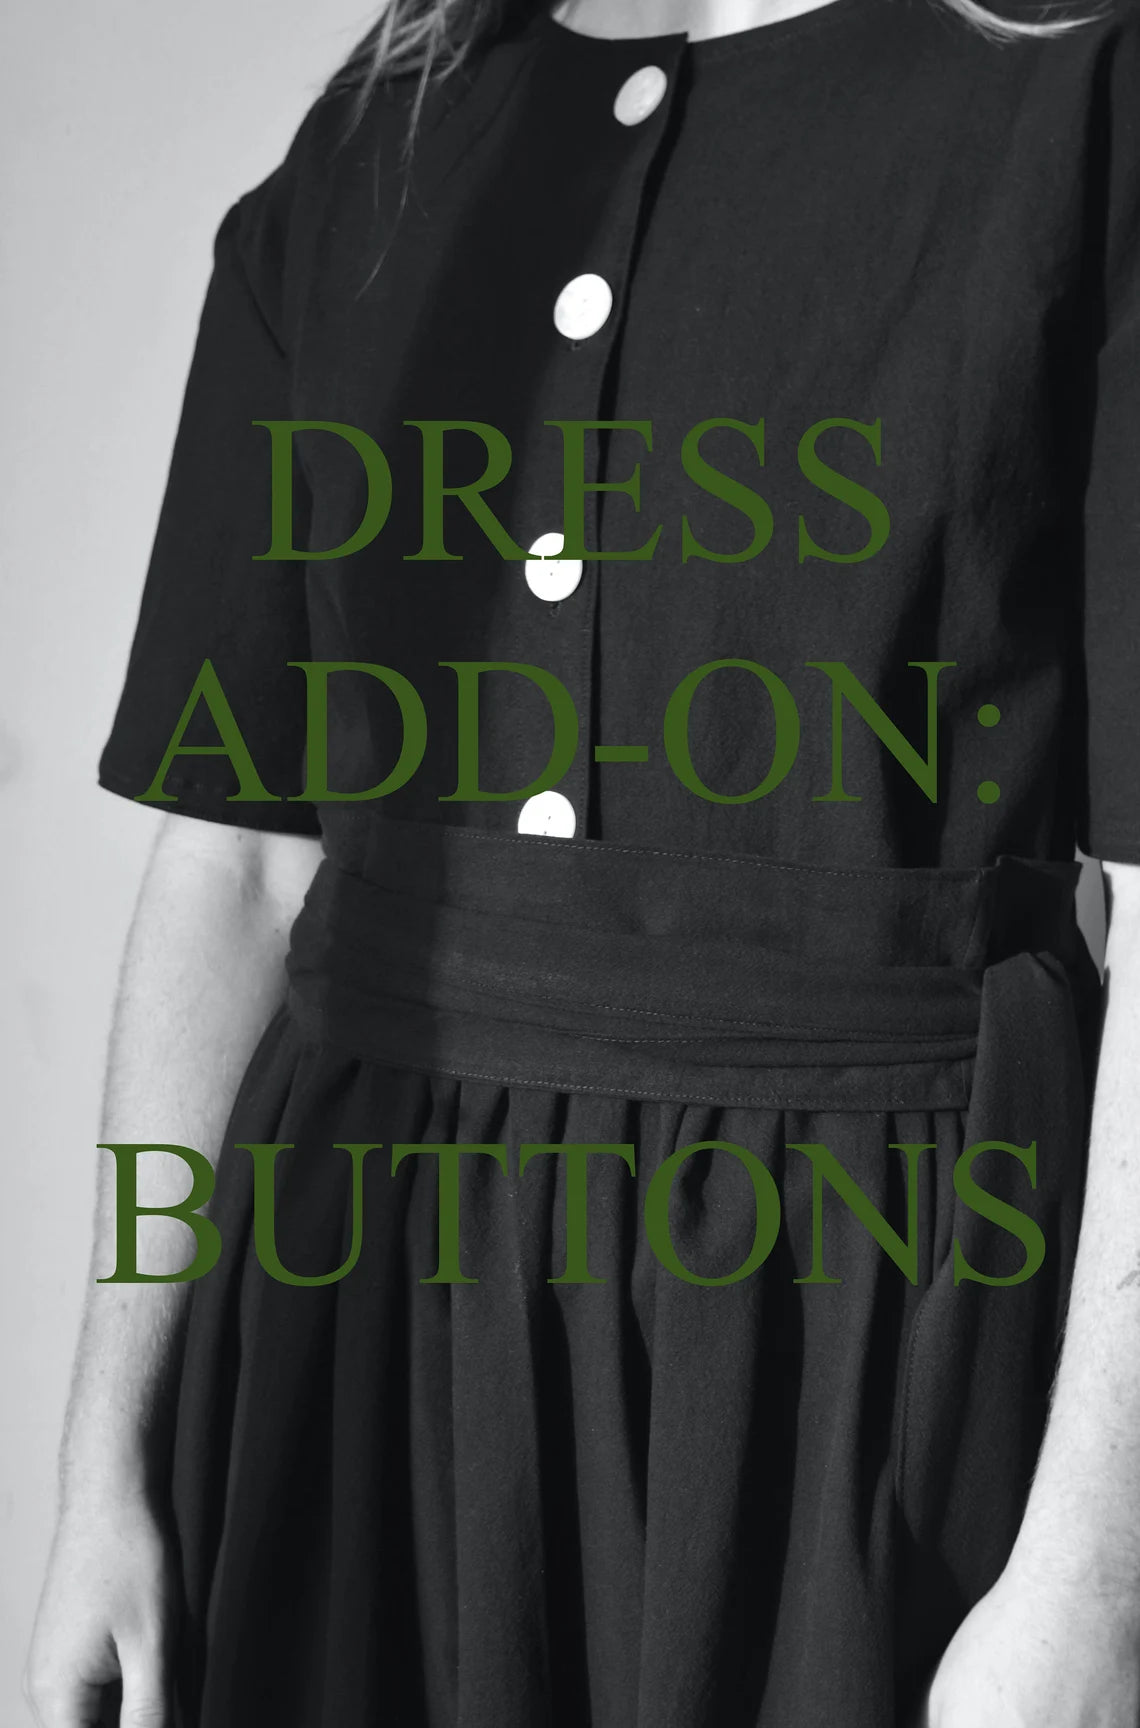 ADD-ON - BUTTONS